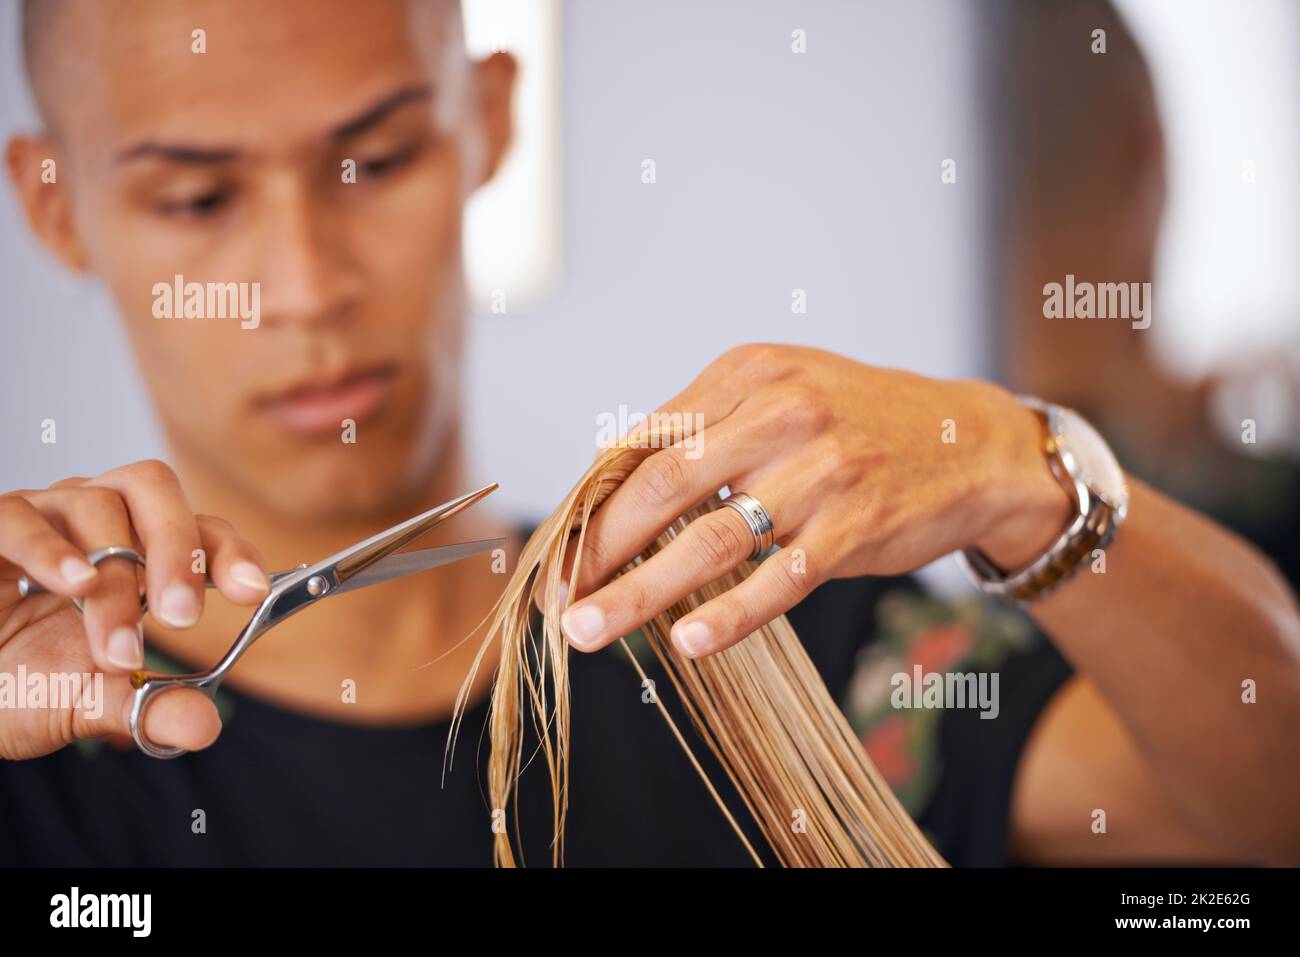 He knows his hair. Cropped shot of a male hairdresser cutting a clients hair. Stock Photo